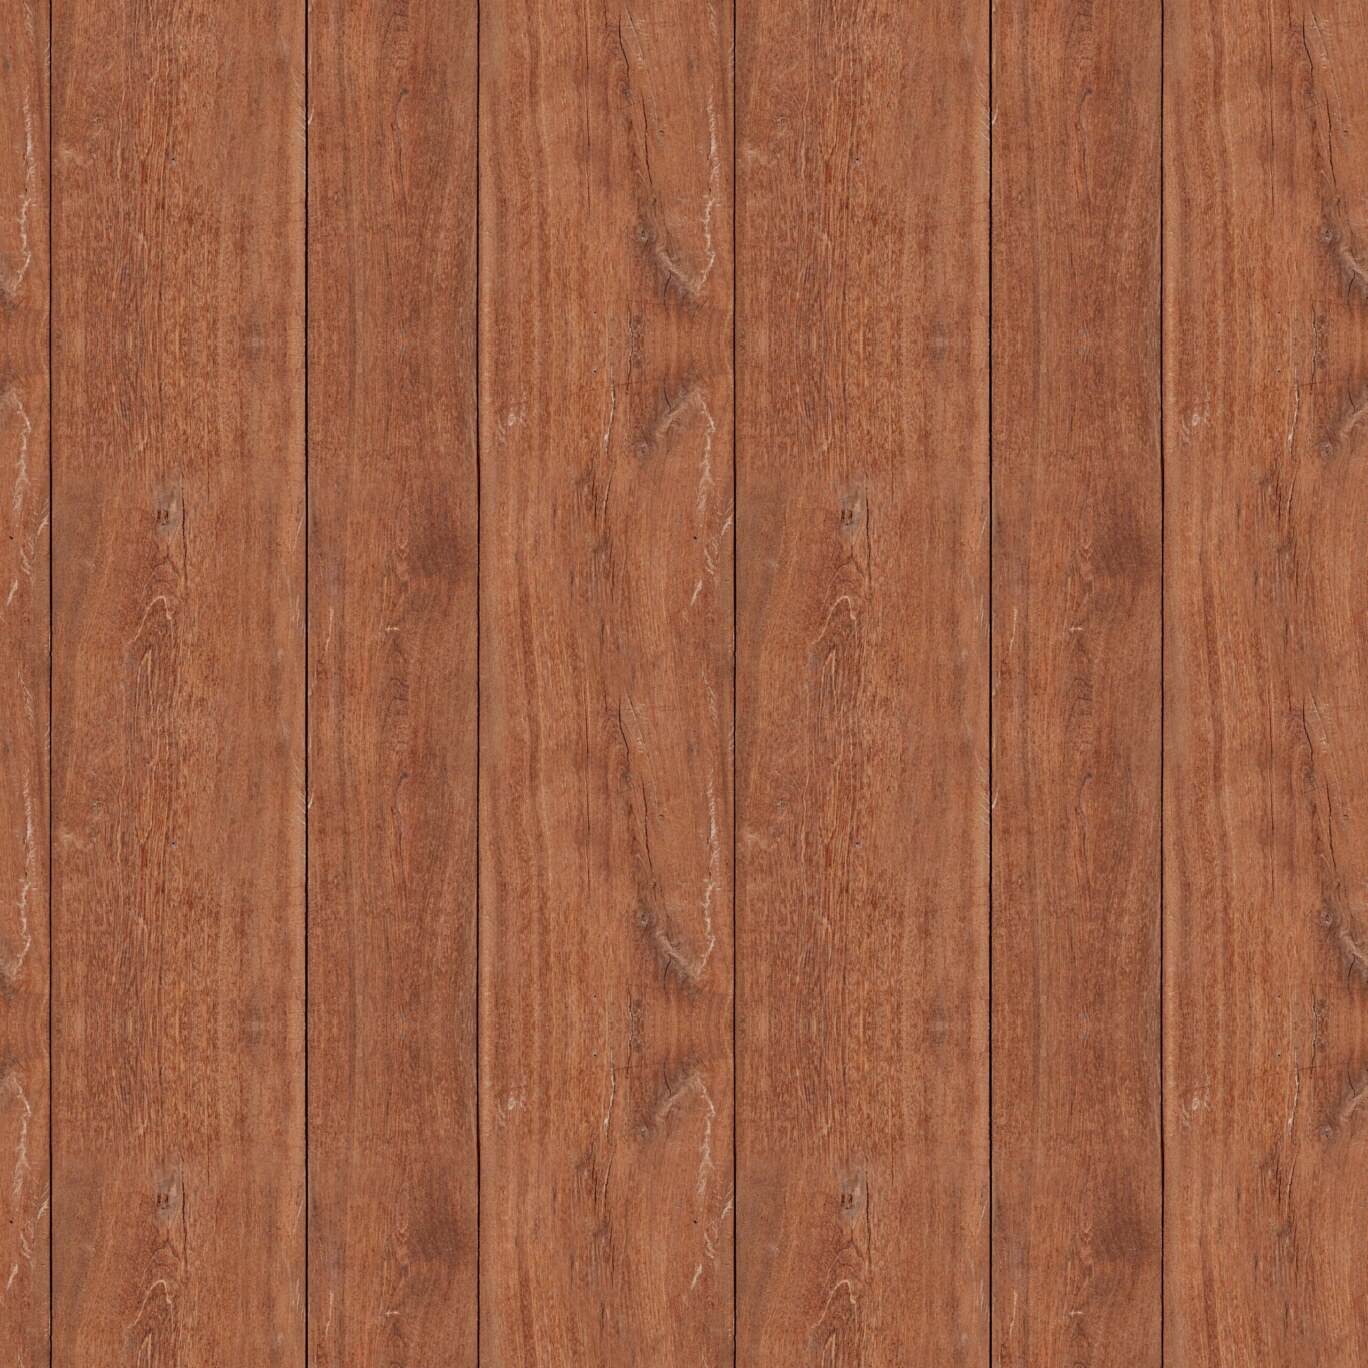 Brown-Old-Natural-Wood-flooor-plank-3D-Texture-seamless-PBR-material-High-Resolution-Free-Download-4k